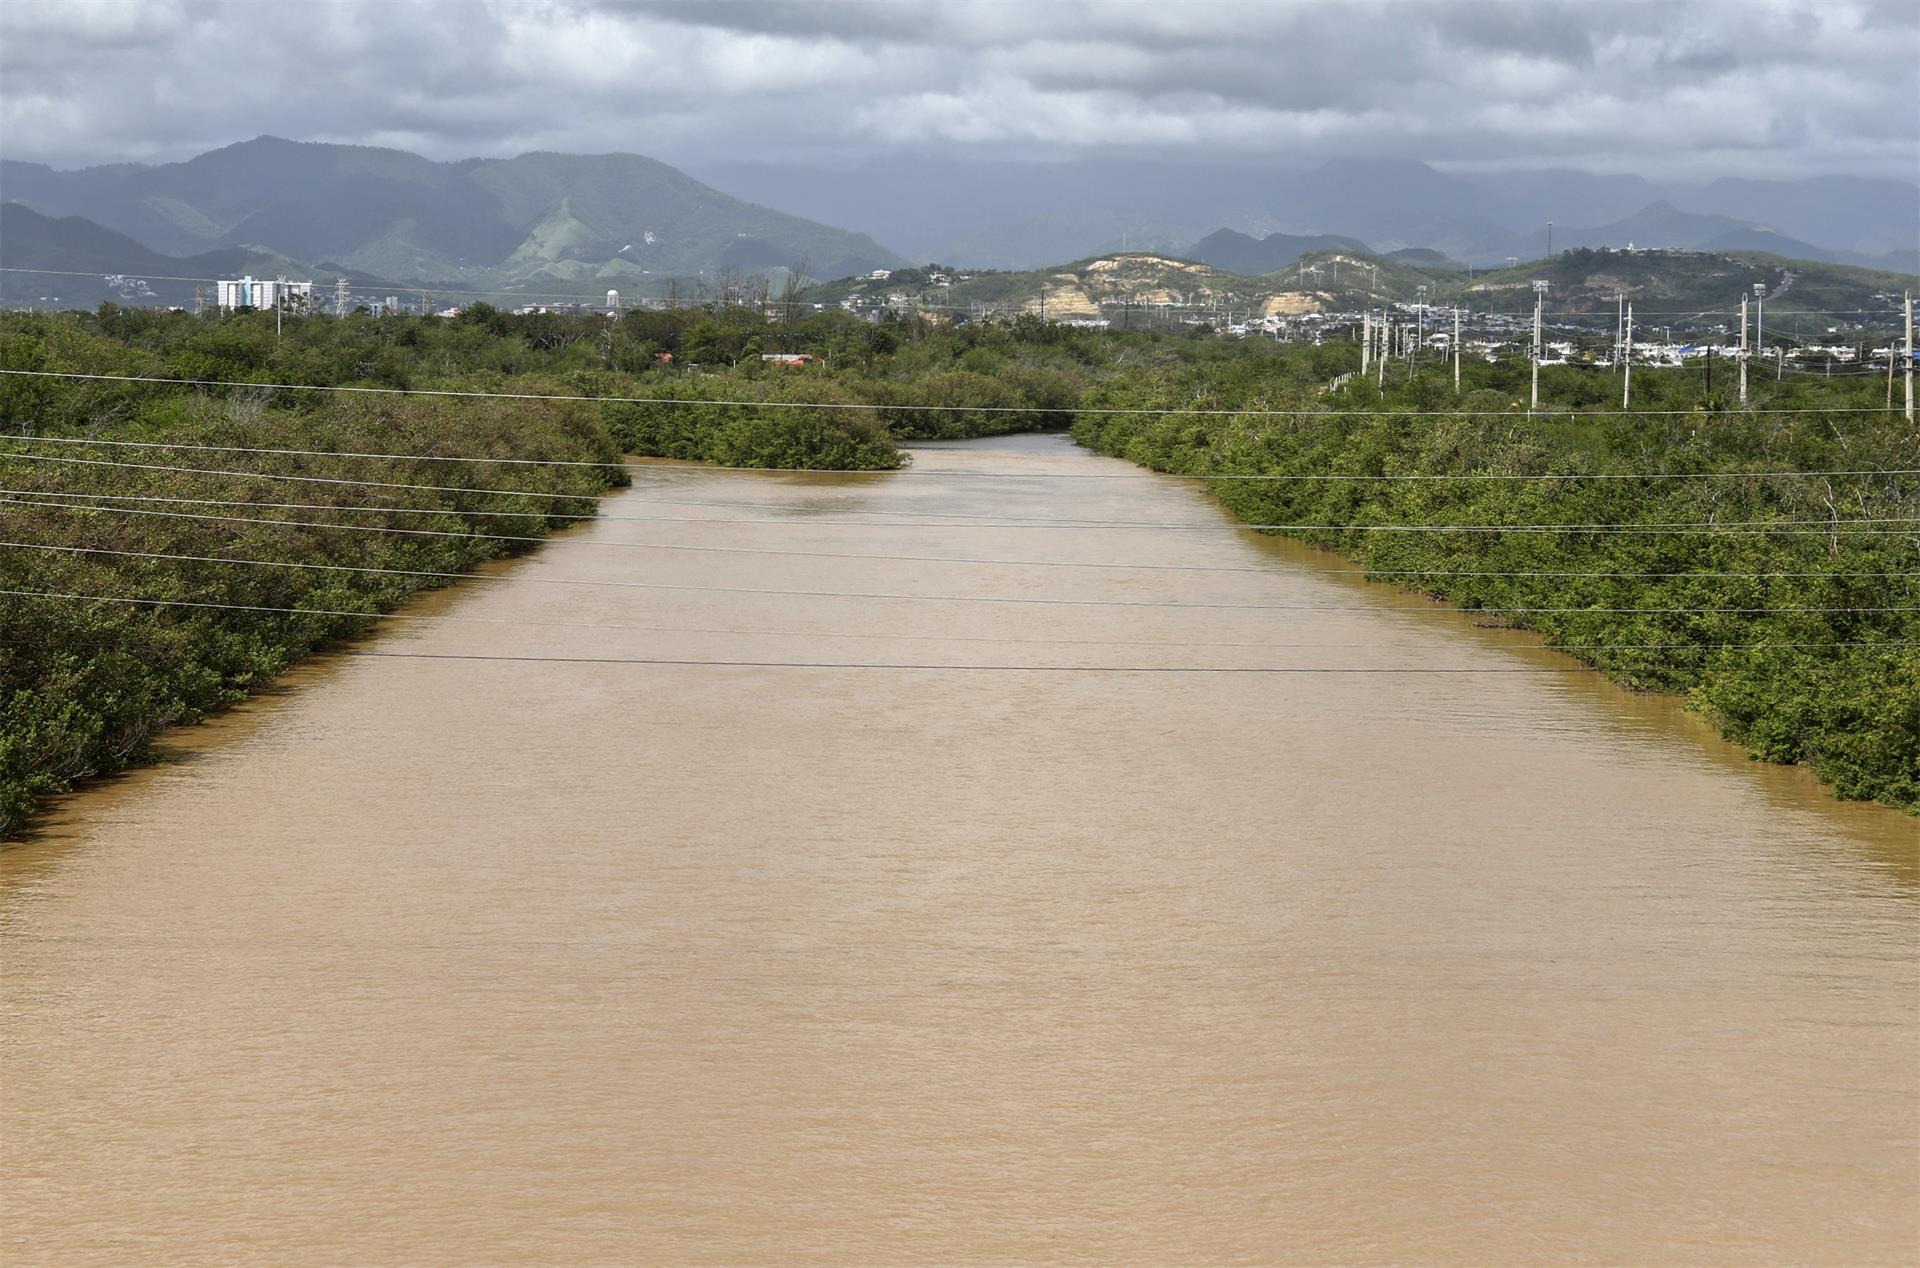 Photograph from this Wednesday showing a flooded river due to the passage of Hurricane Fiona in Ponce, Puerto Rico.  EFE/Thais Llorca